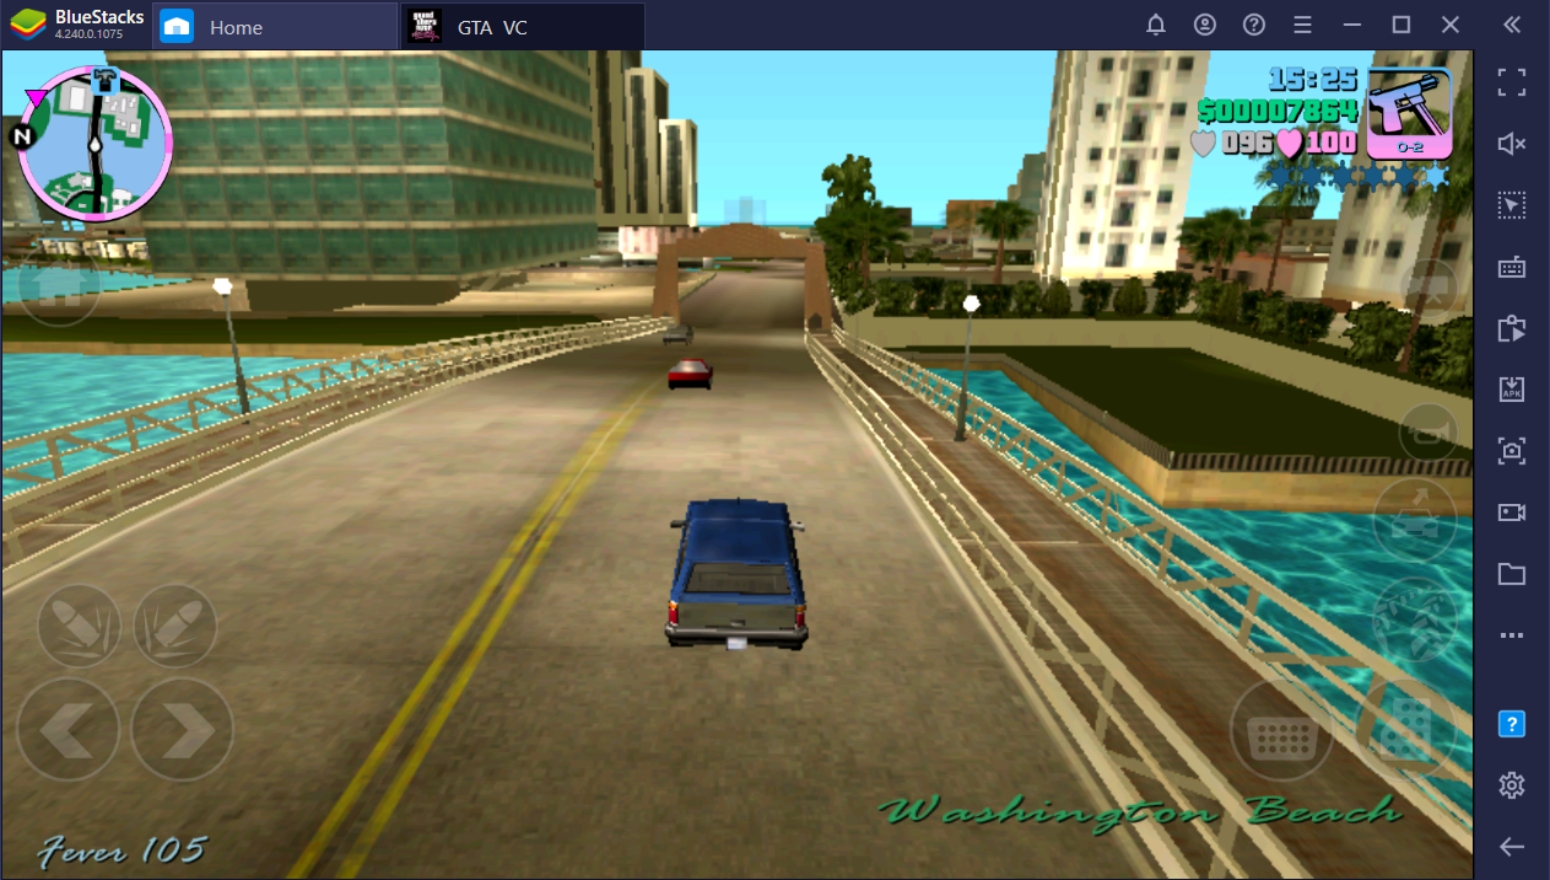 How to play GTA Vice City Online